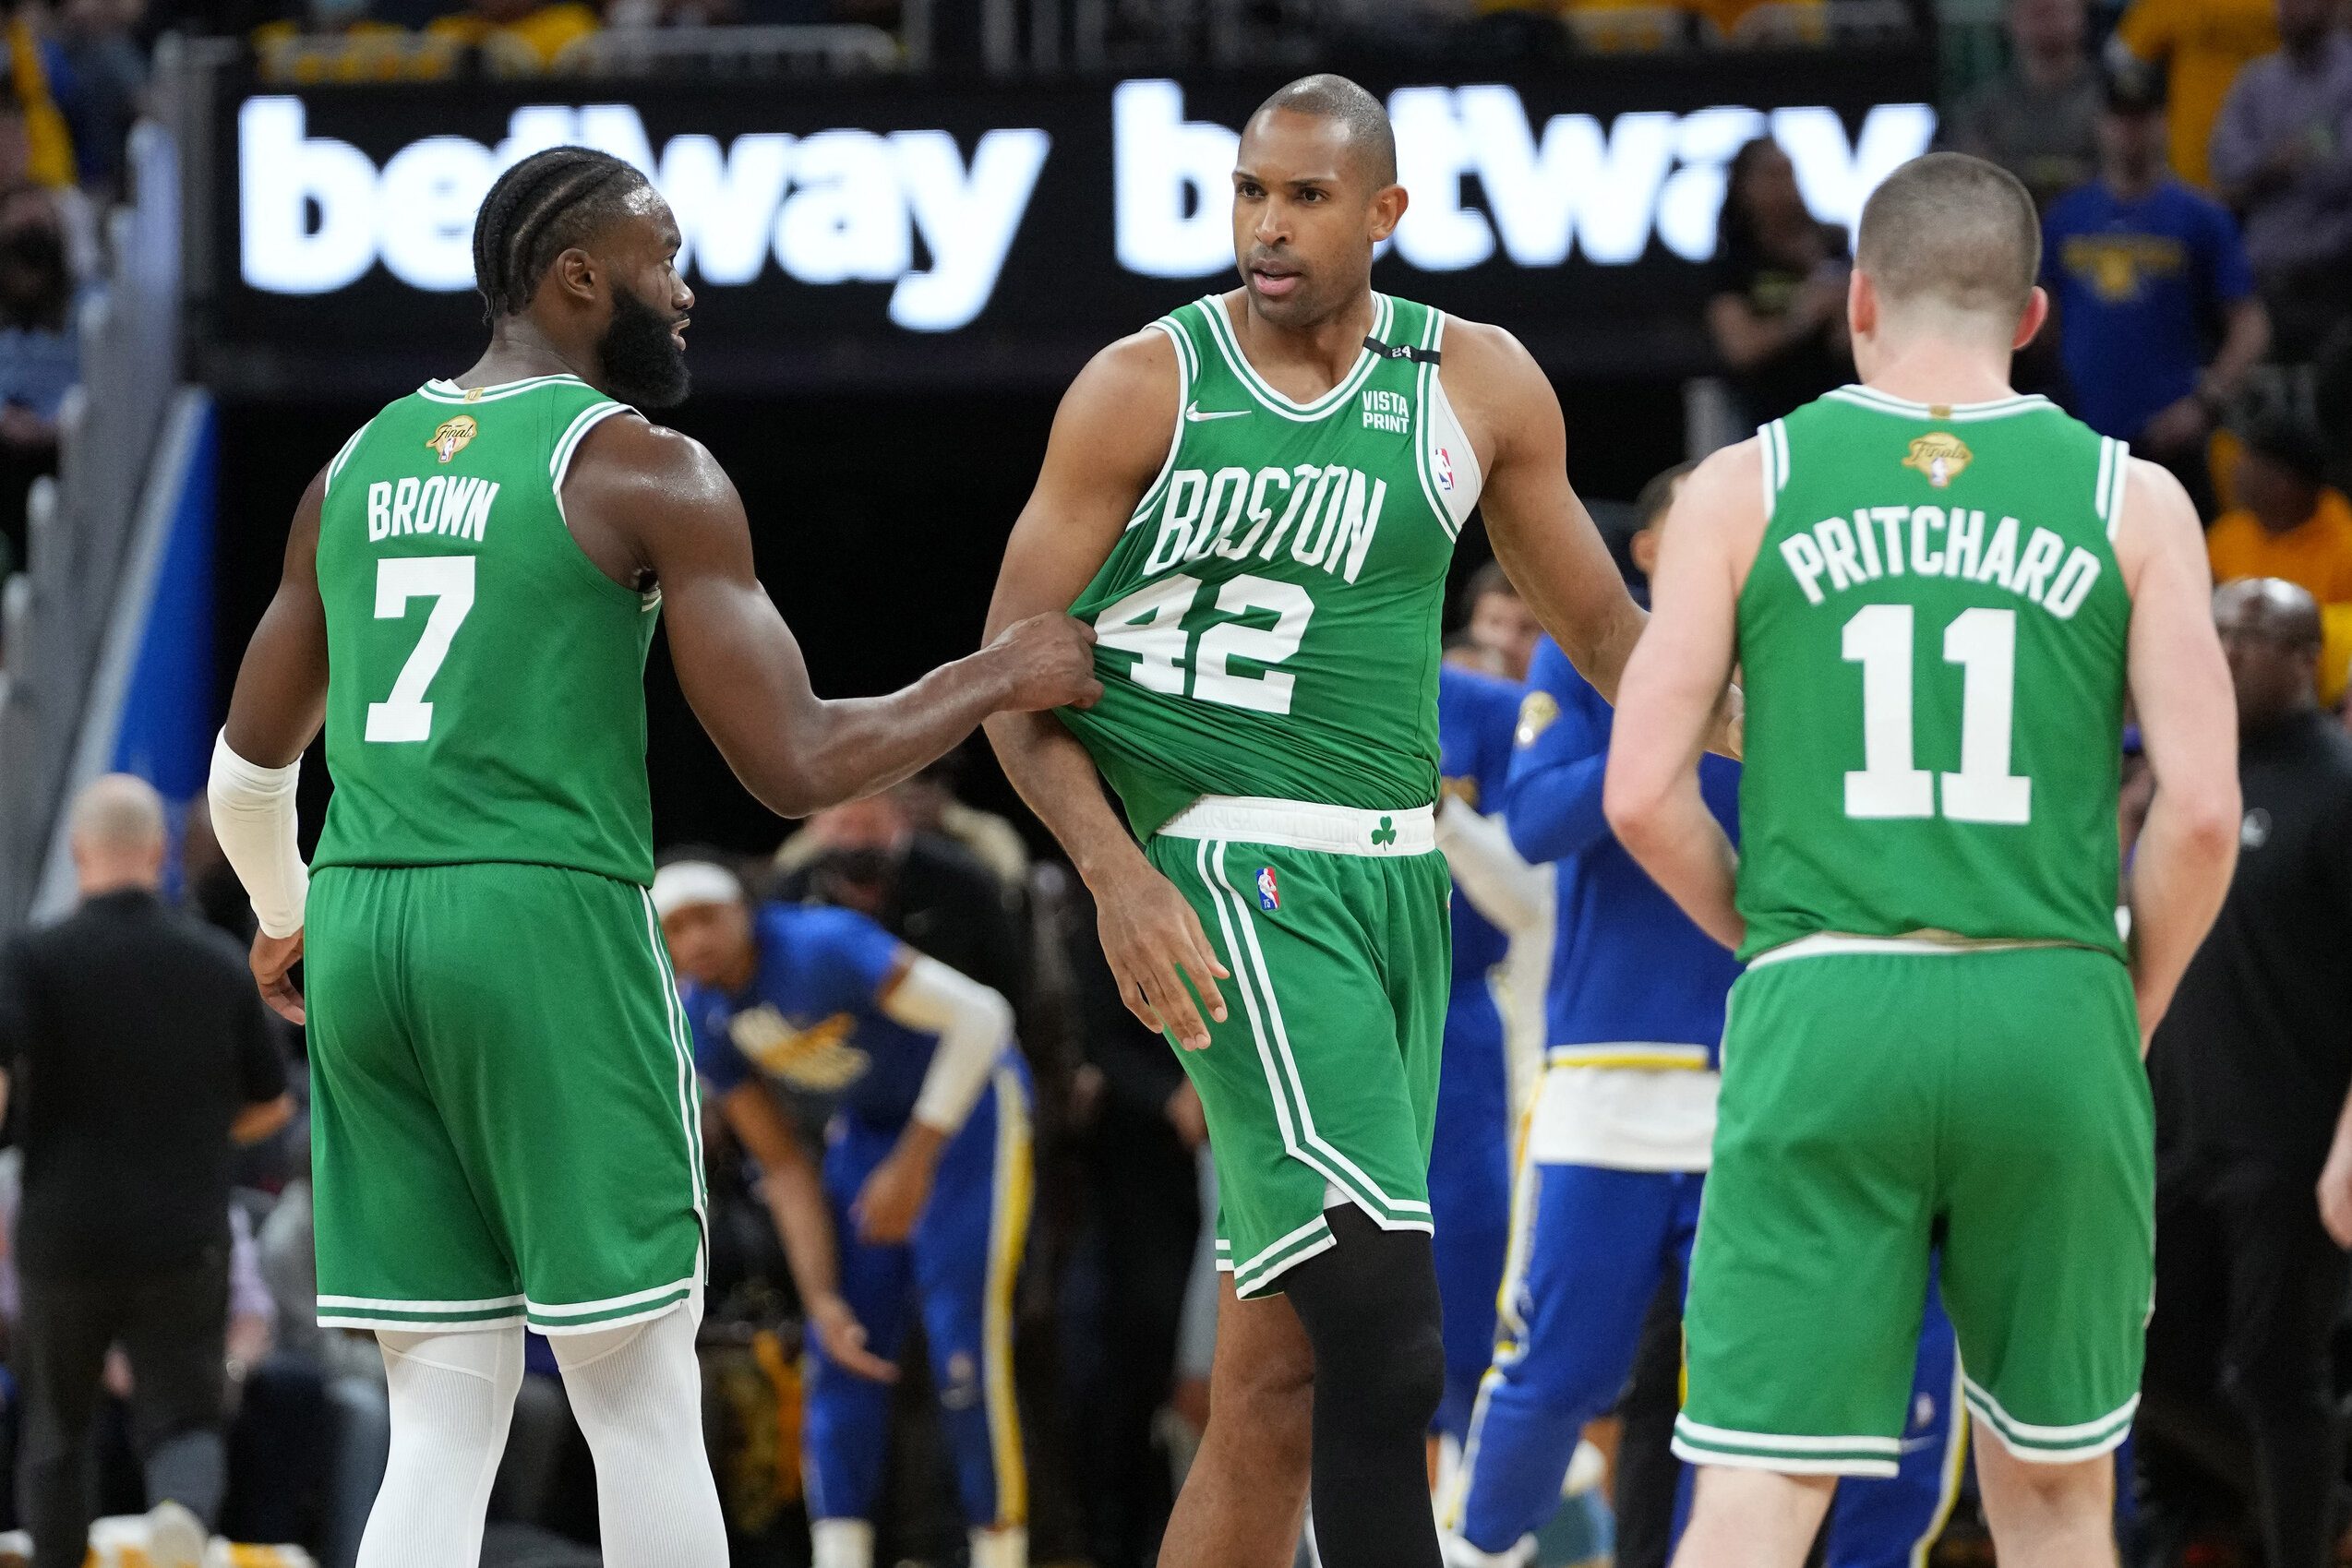 ‘I’ve been waiting for this moment’: Horford sensational in Finals debut